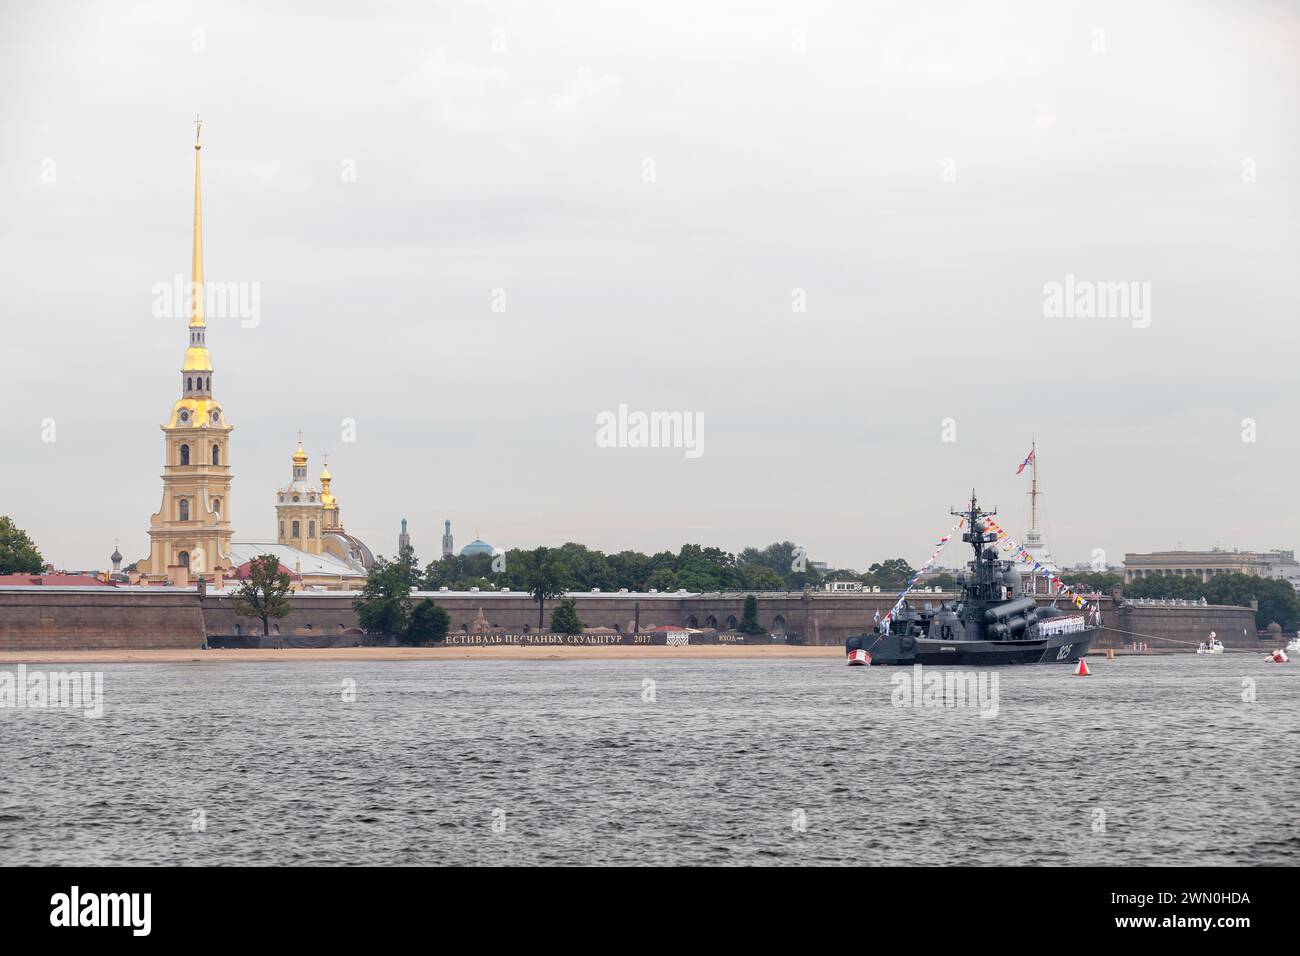 Saint-Petersburg, Russia - July 28, 2017: Warship on the Neva River. Dimitrovgrad (hull number 825) is a large missile boat of project 12411 Stock Photo